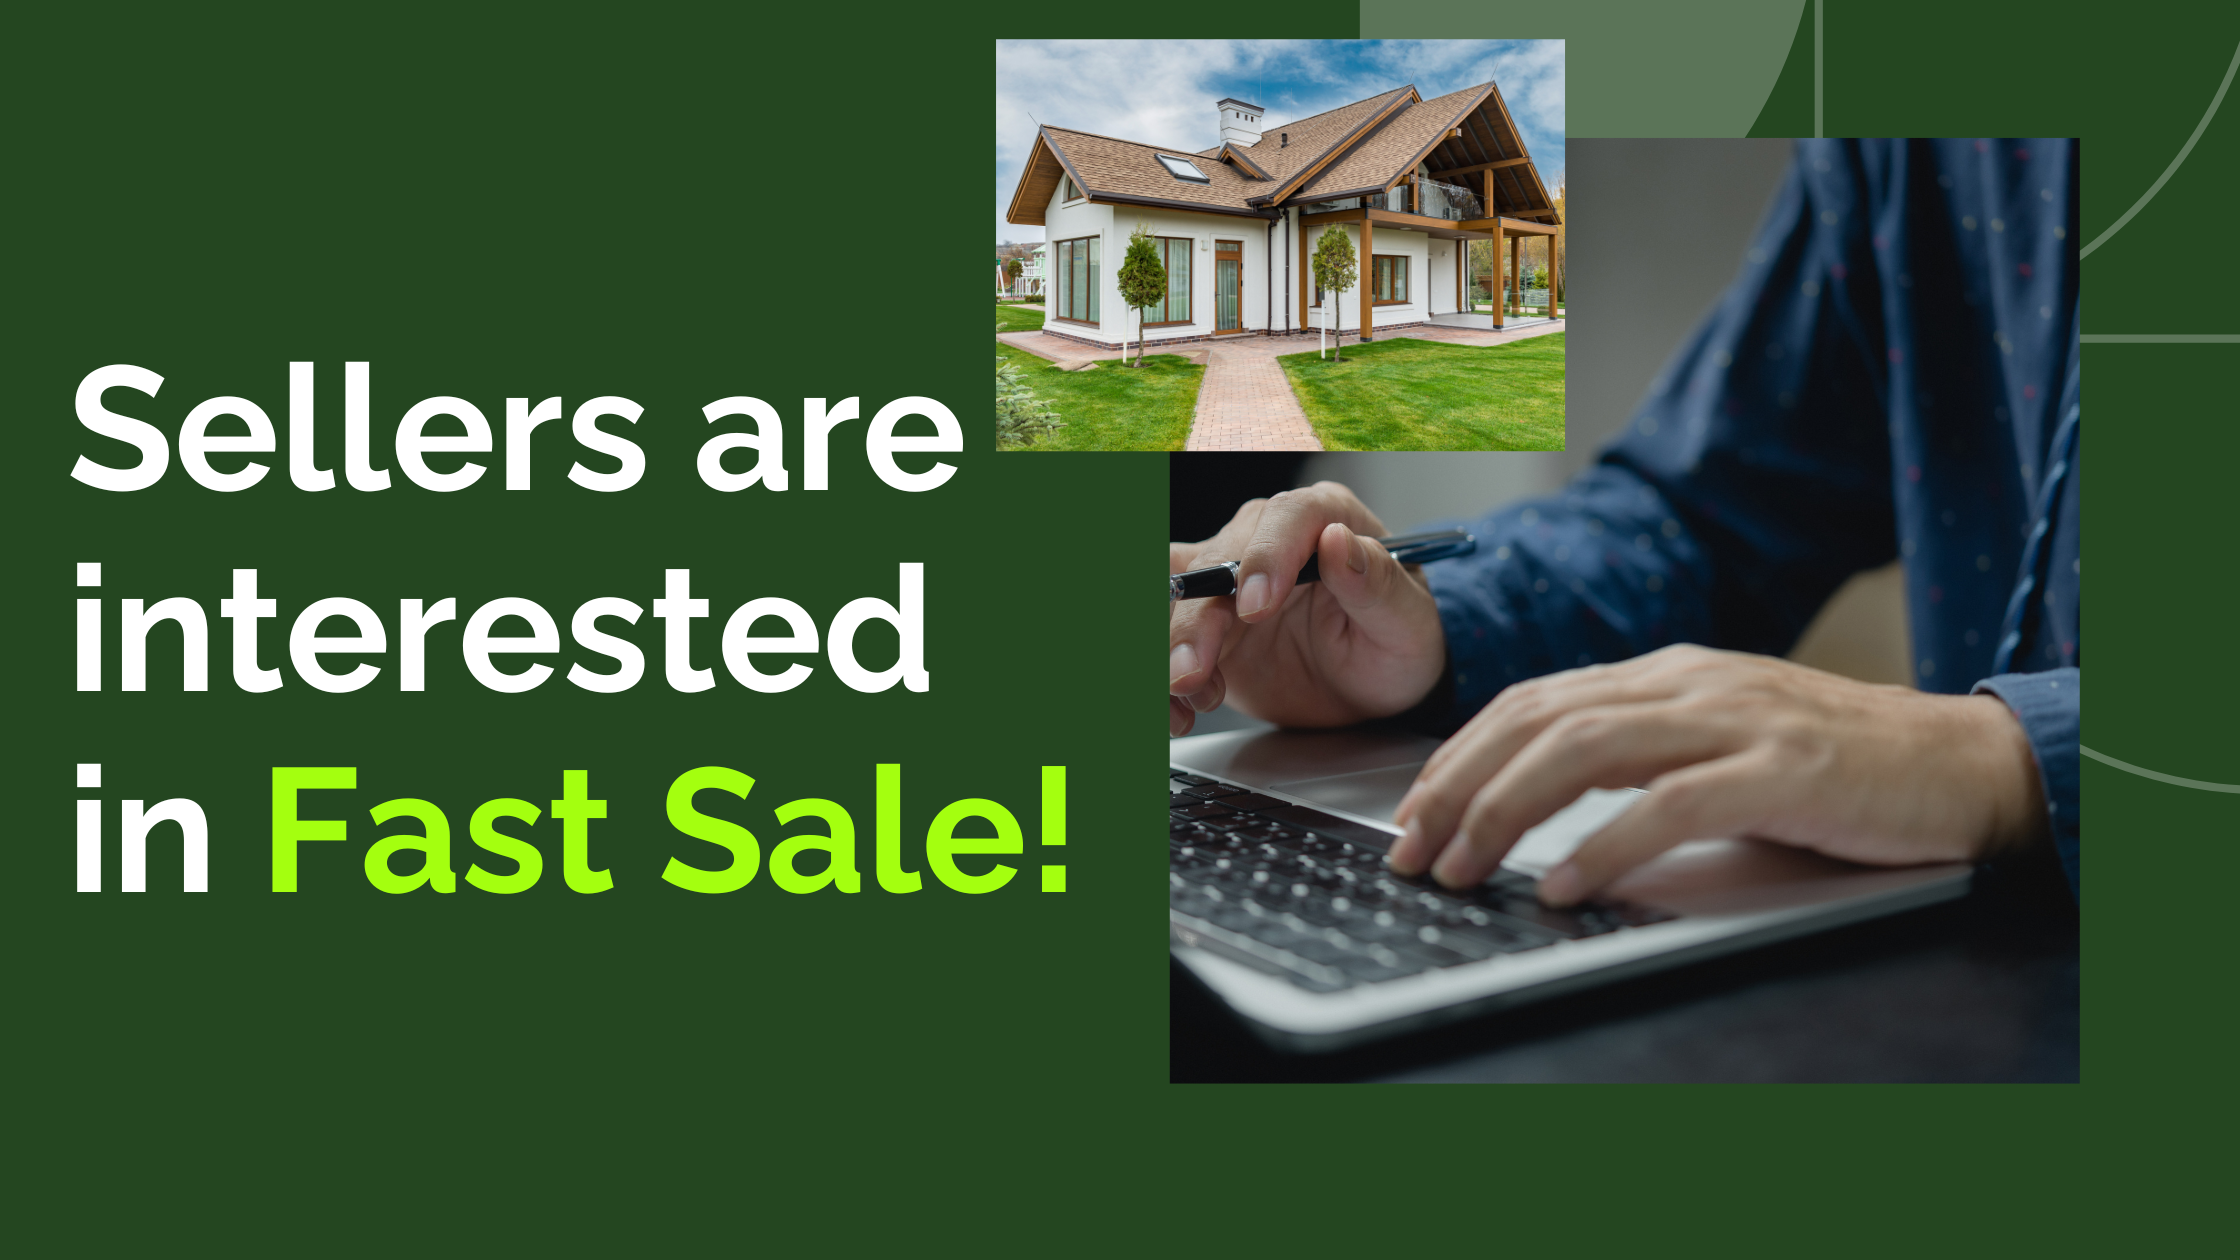 Recent Search Trends Indicate Sellers are Interested in 'Fast Sale'